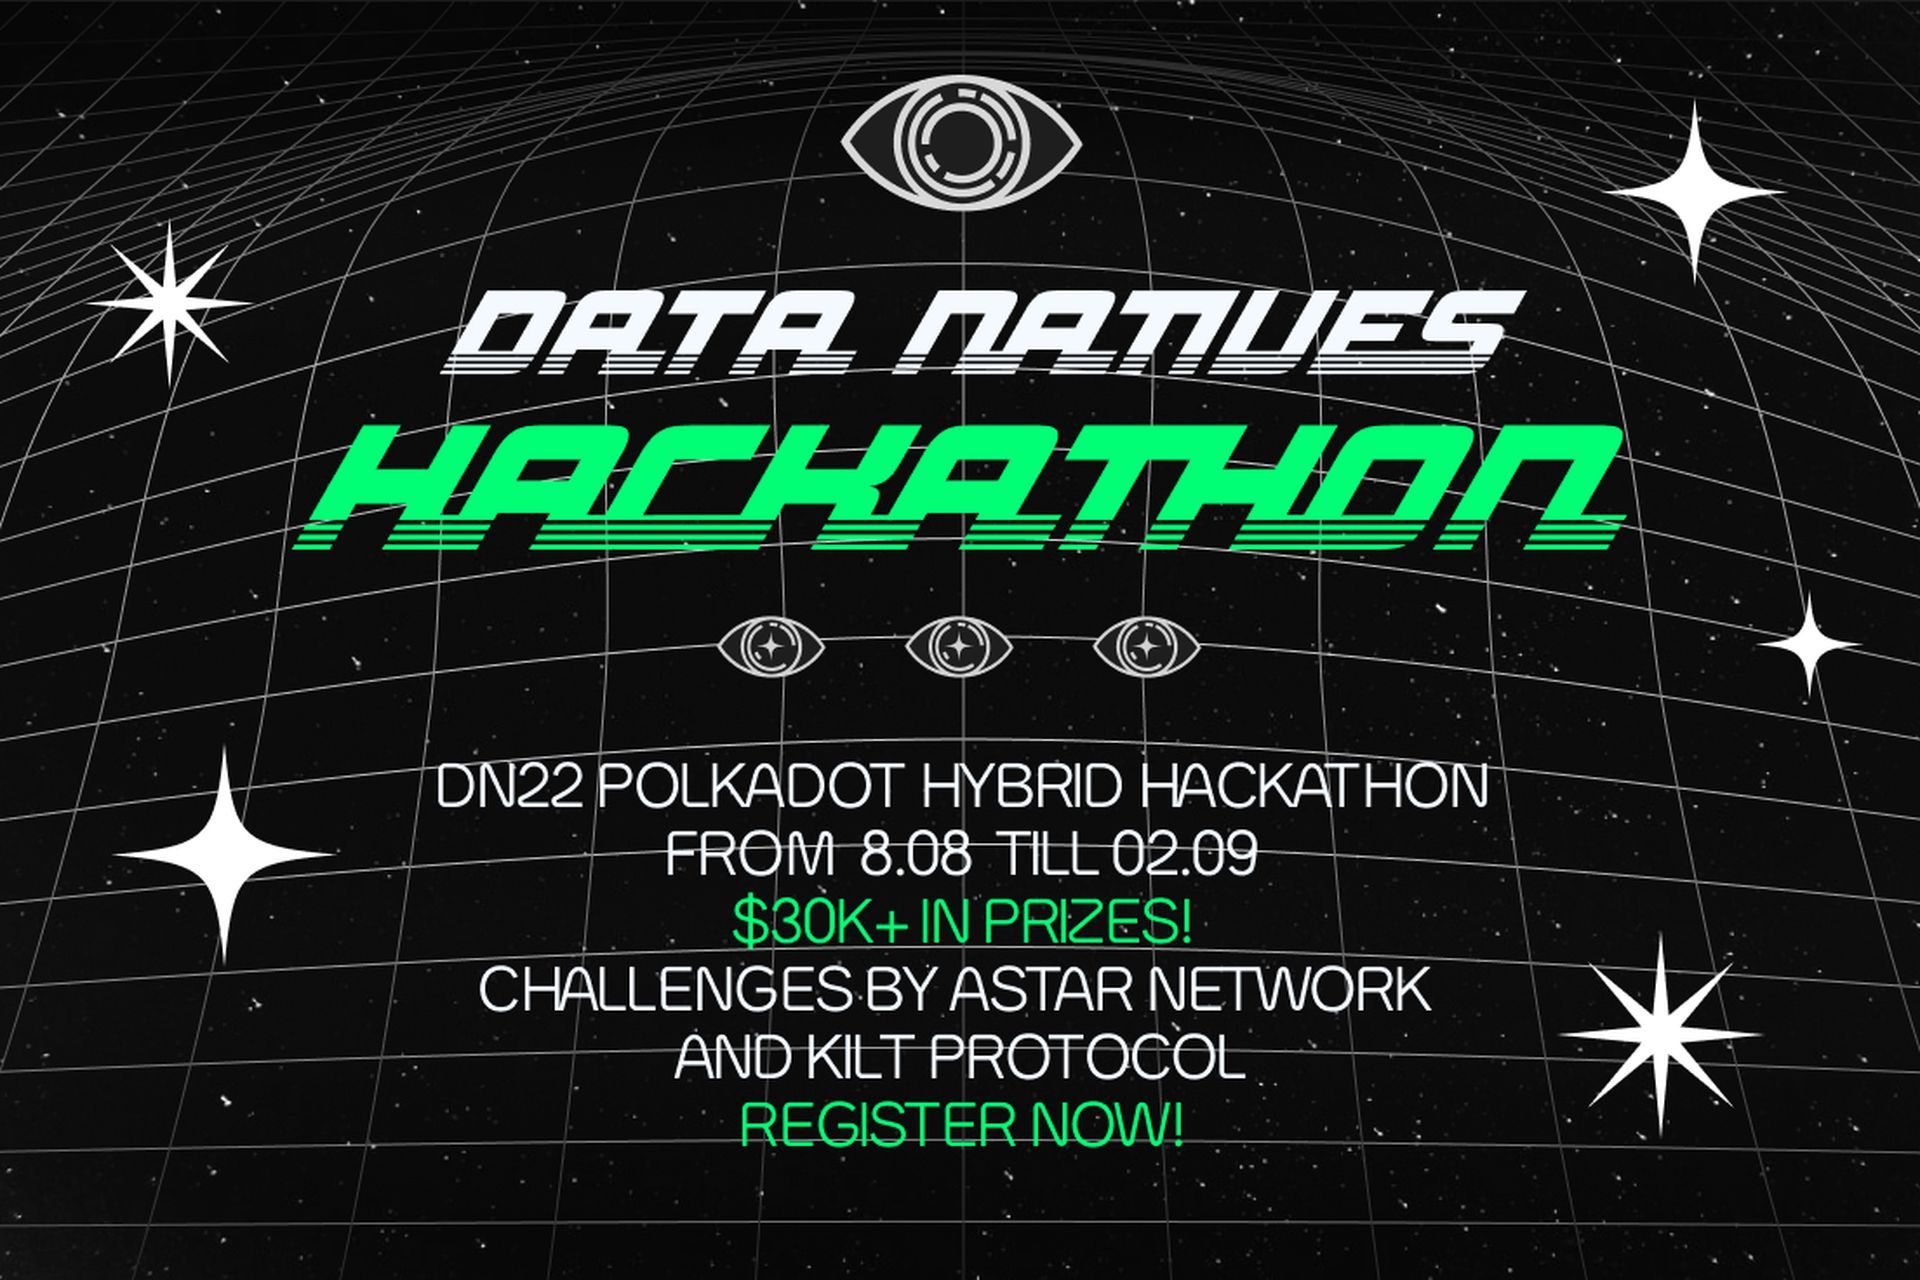 DN22 Conference invites tech-savvy coders to the annual Polkadot Hybrid Hackathon challenge!